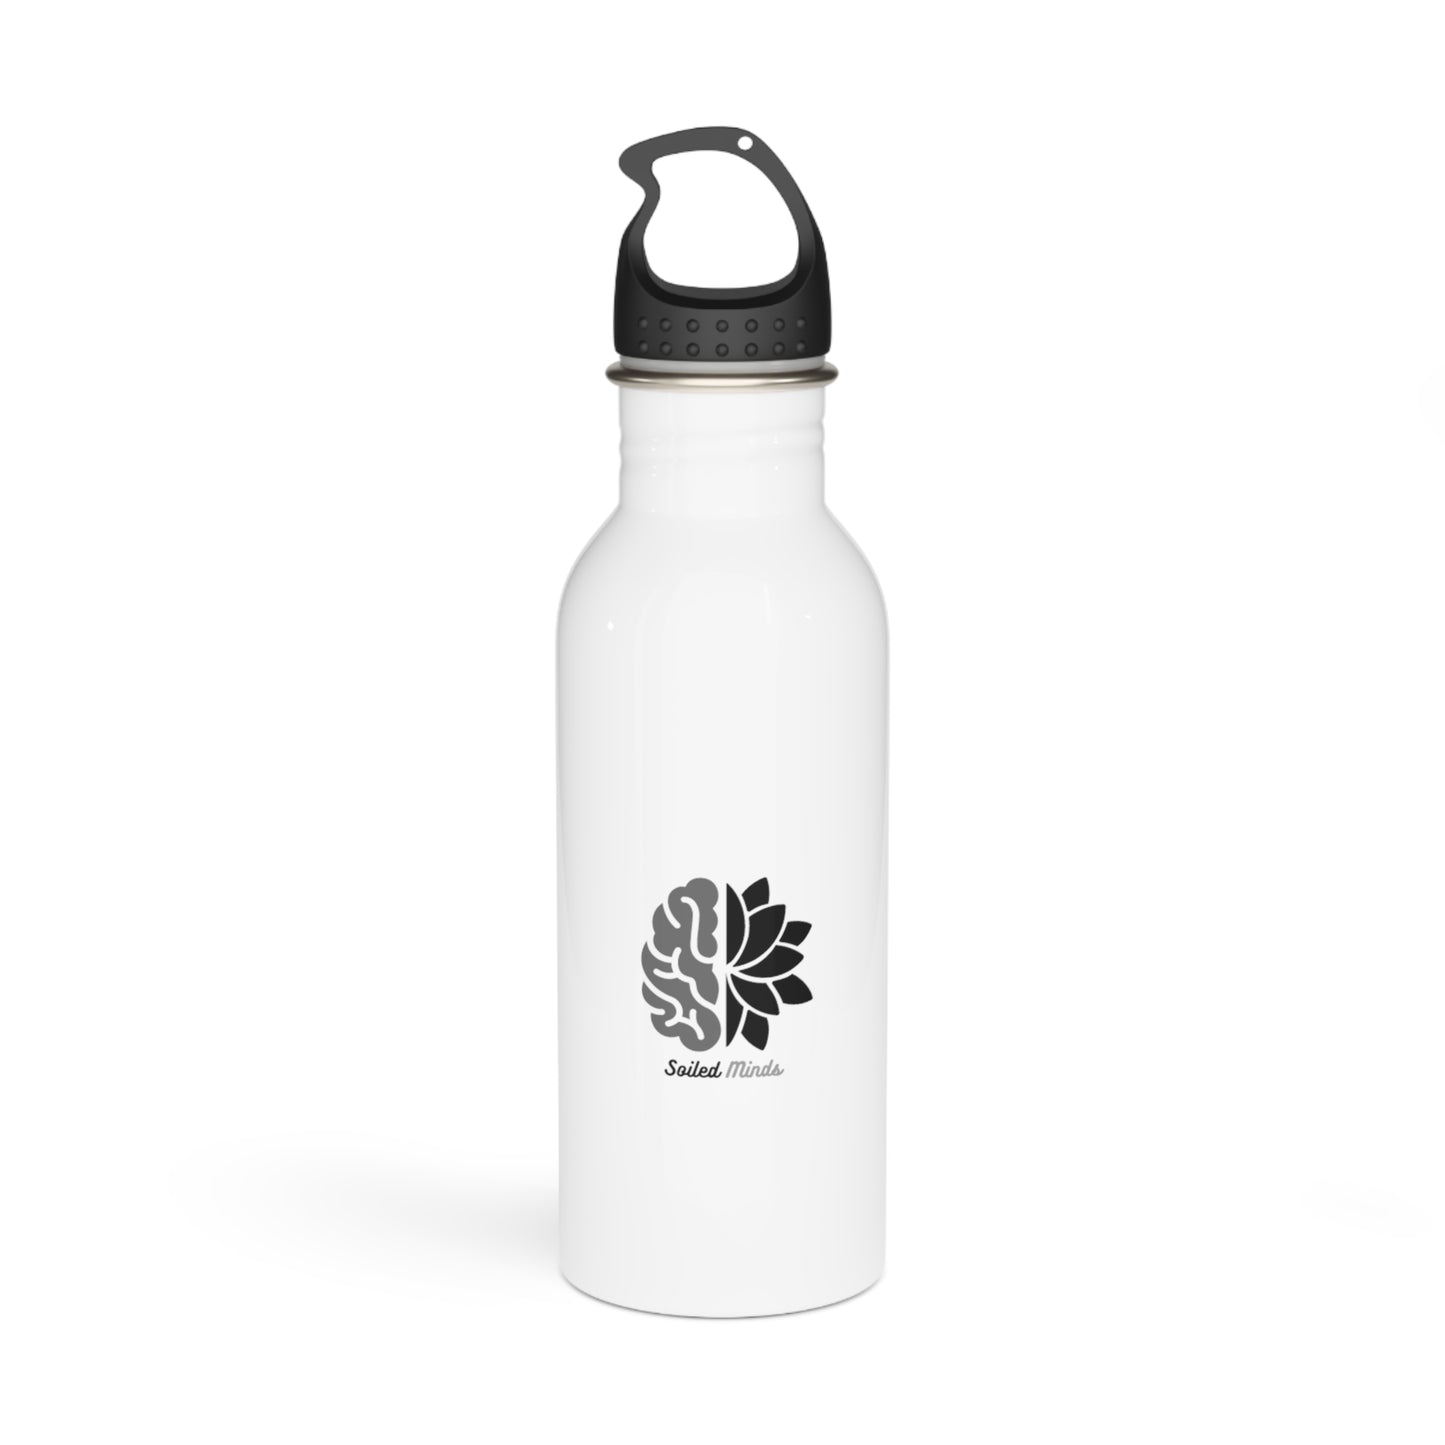 Soiled Minds Stainless Steel Water Bottle